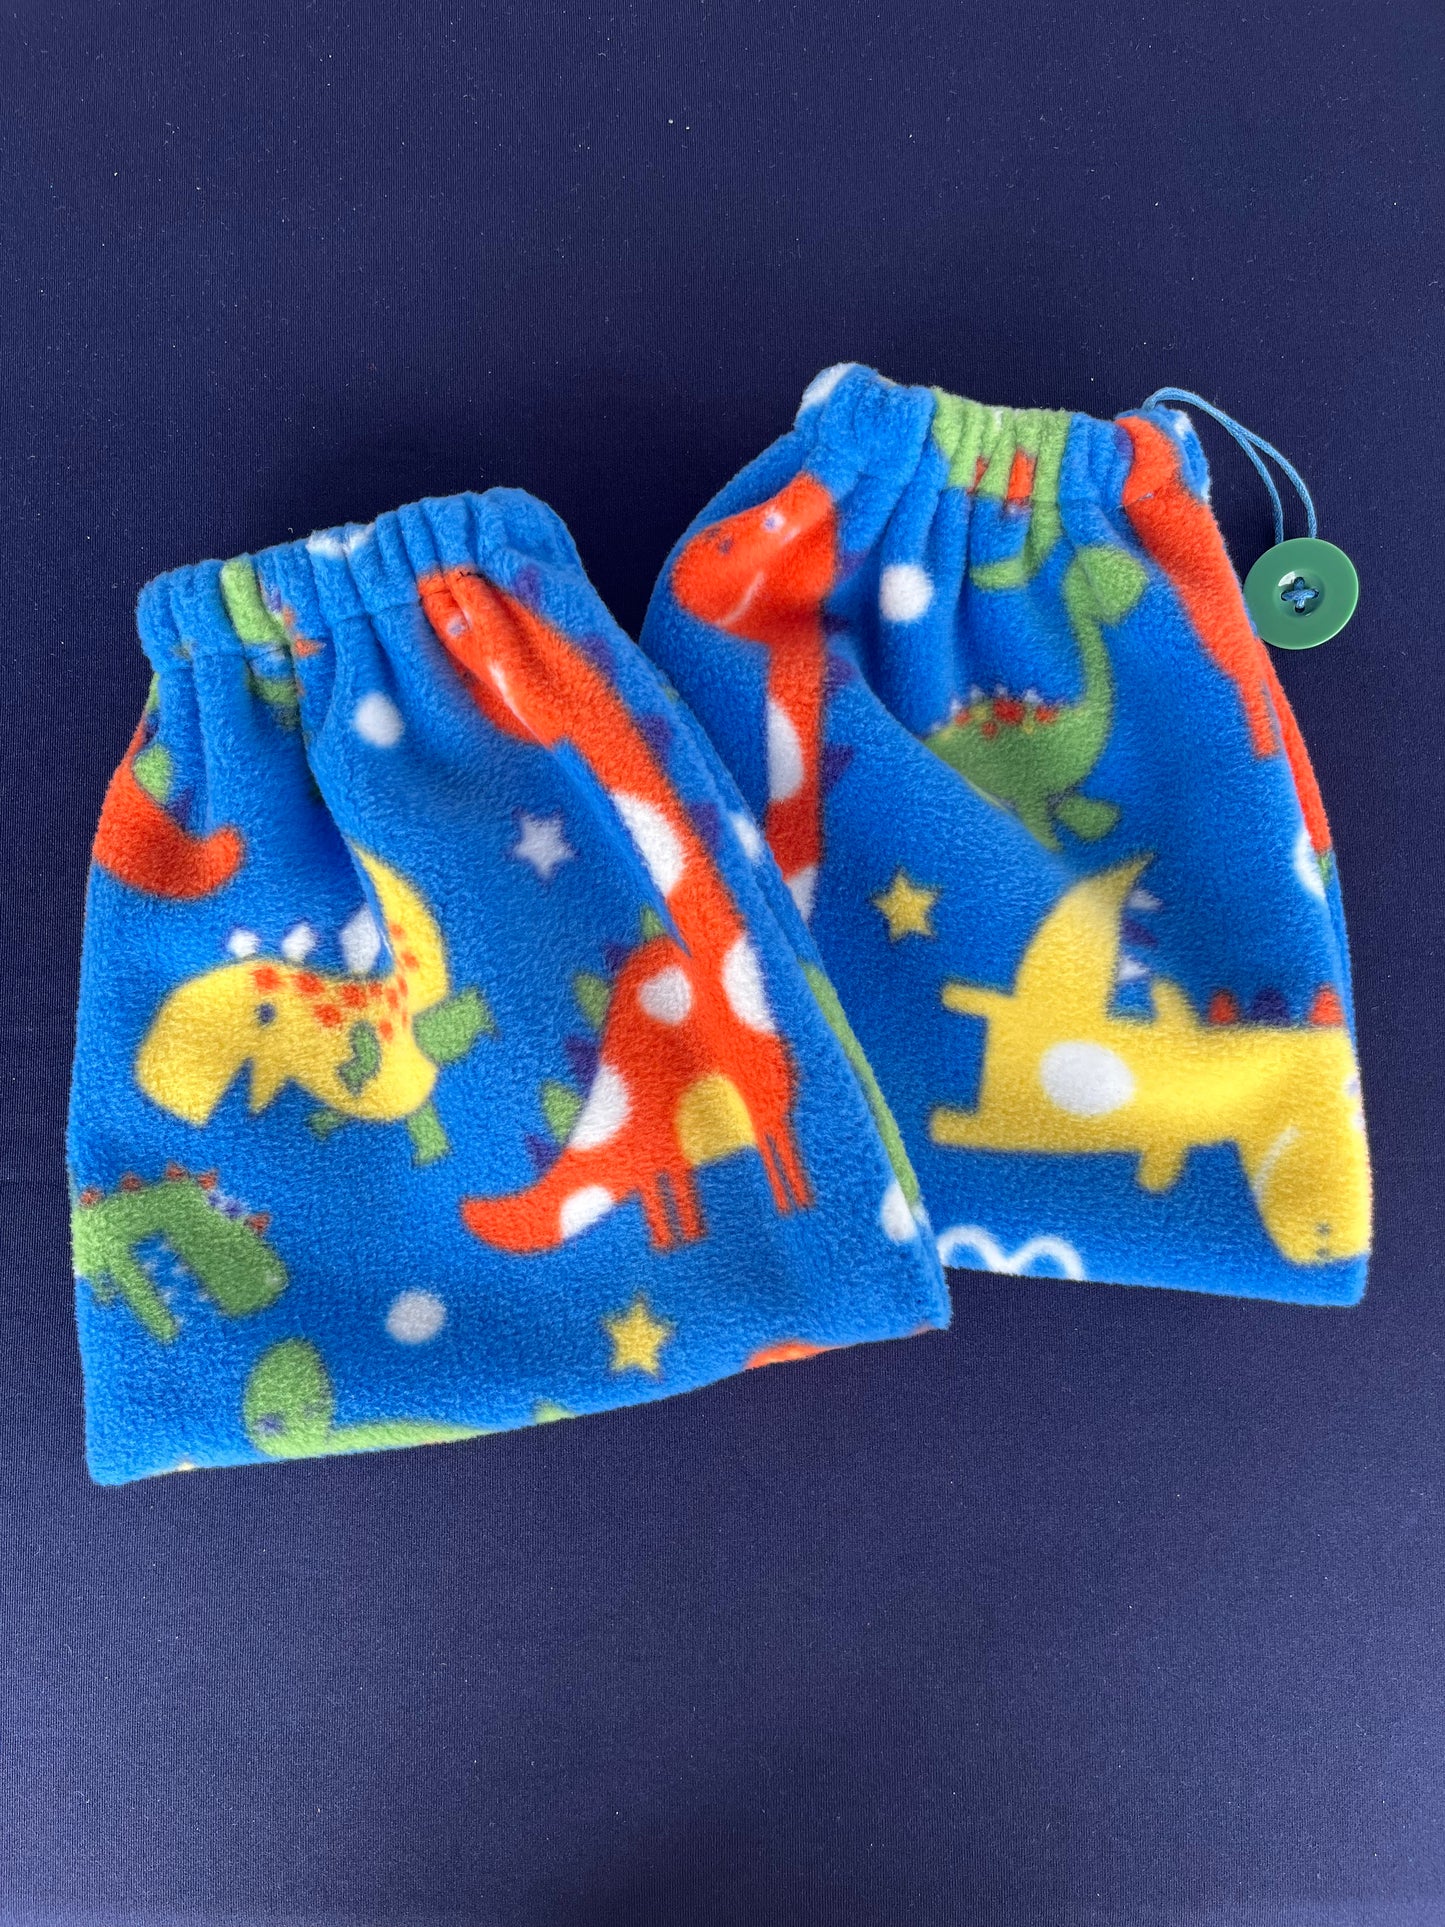 blue stirrup covers with different colour and sized dinosaurs on them